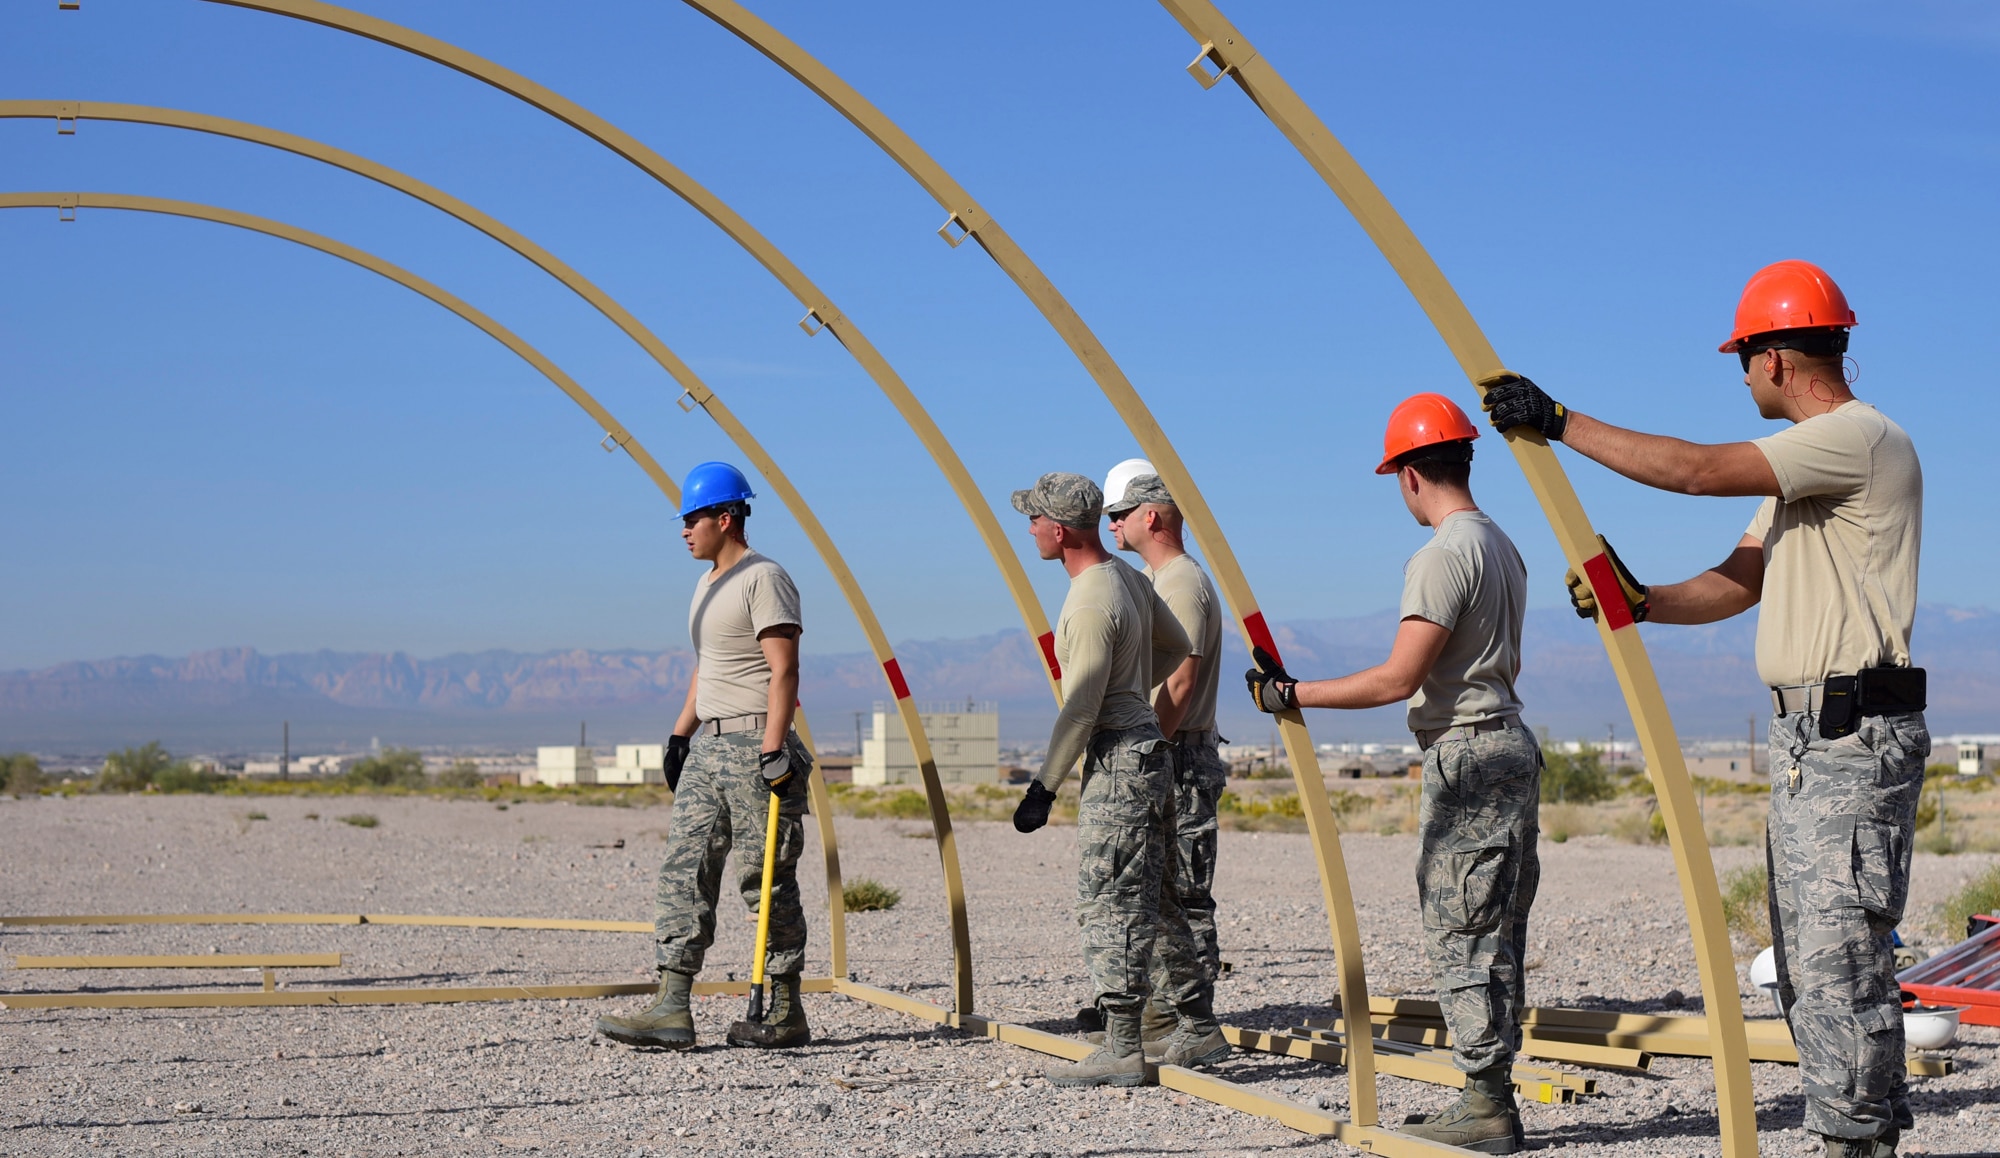 99th Civil Engineer Squadron structural engineers build a field tent during a base emergency engineer force training exercise at Nellis Air Force Base, Nevada, Oct. 19, 2017. Field tents provide shelter and storage for personnel and equipment in deployed locations. (U.S. Air Force photo by Airman 1st Class Andrew D. Sarver/Released)